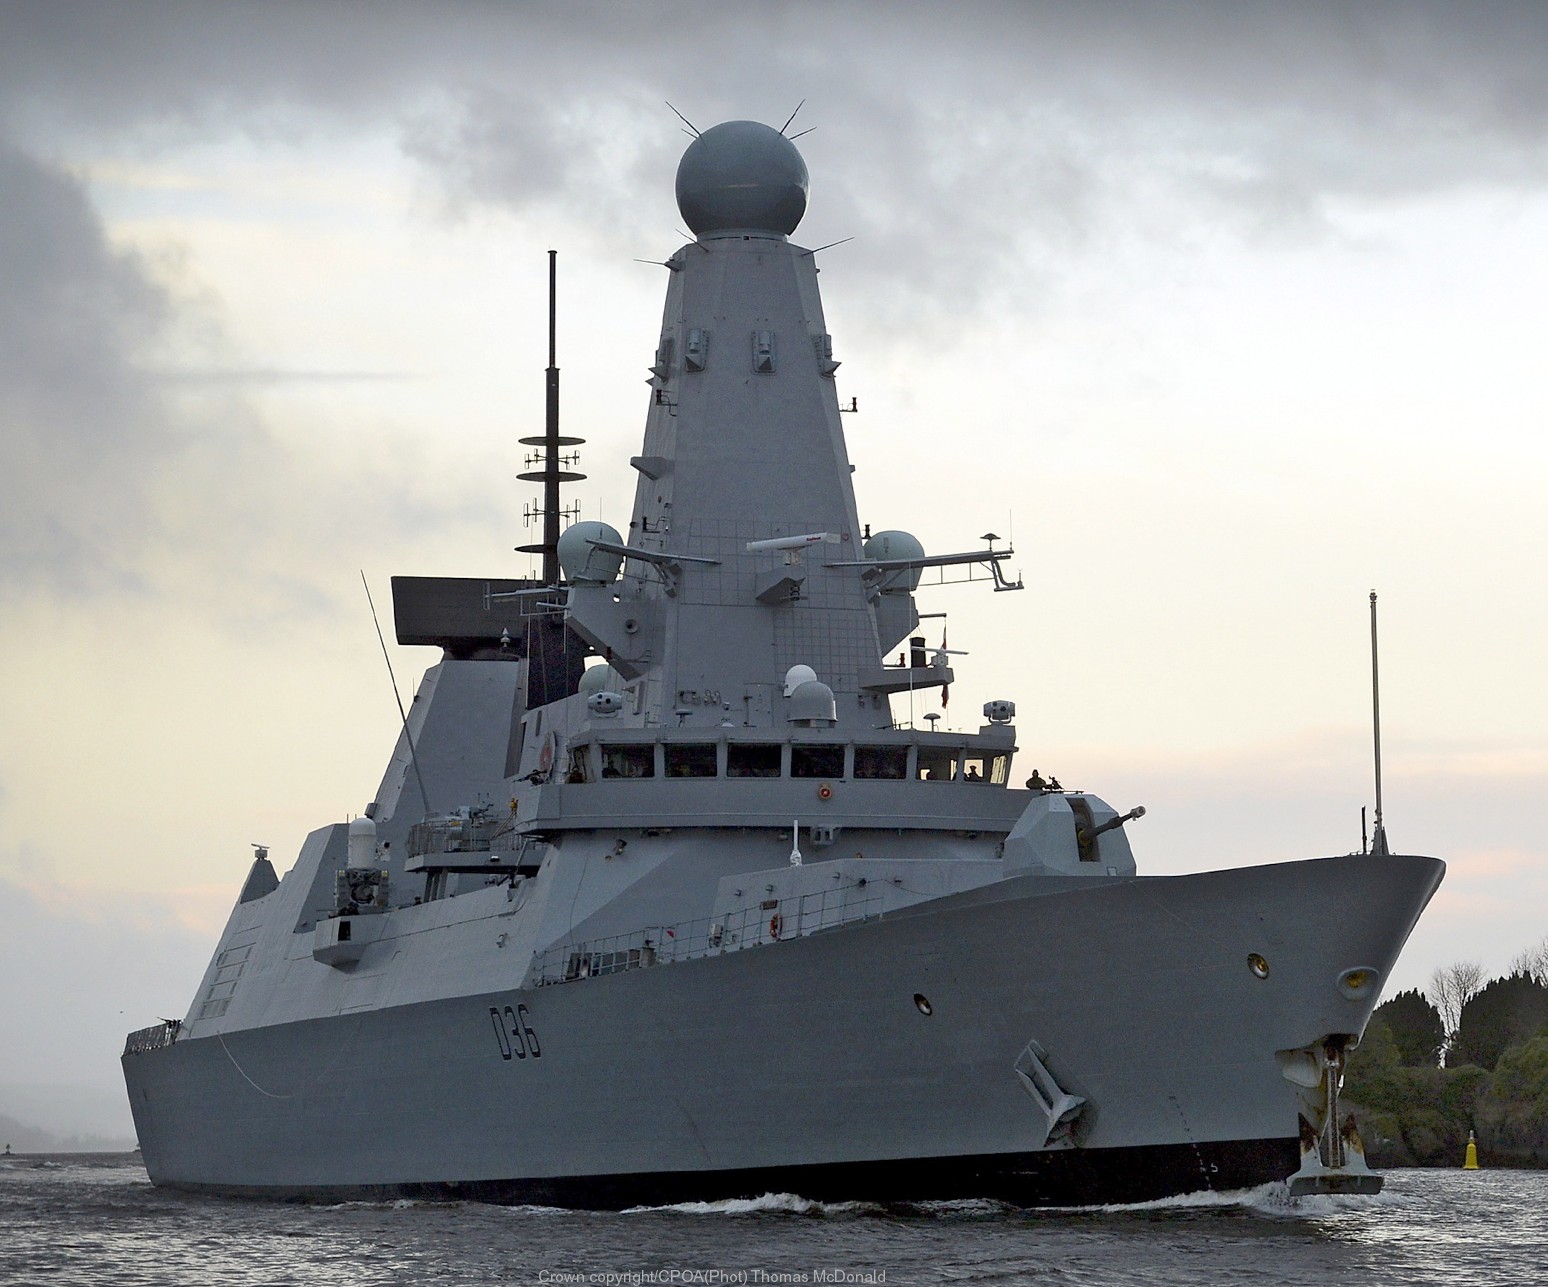 d36 hms defender d-36 type 45 daring class guided missile destroyer ddg royal navy sea viper 04